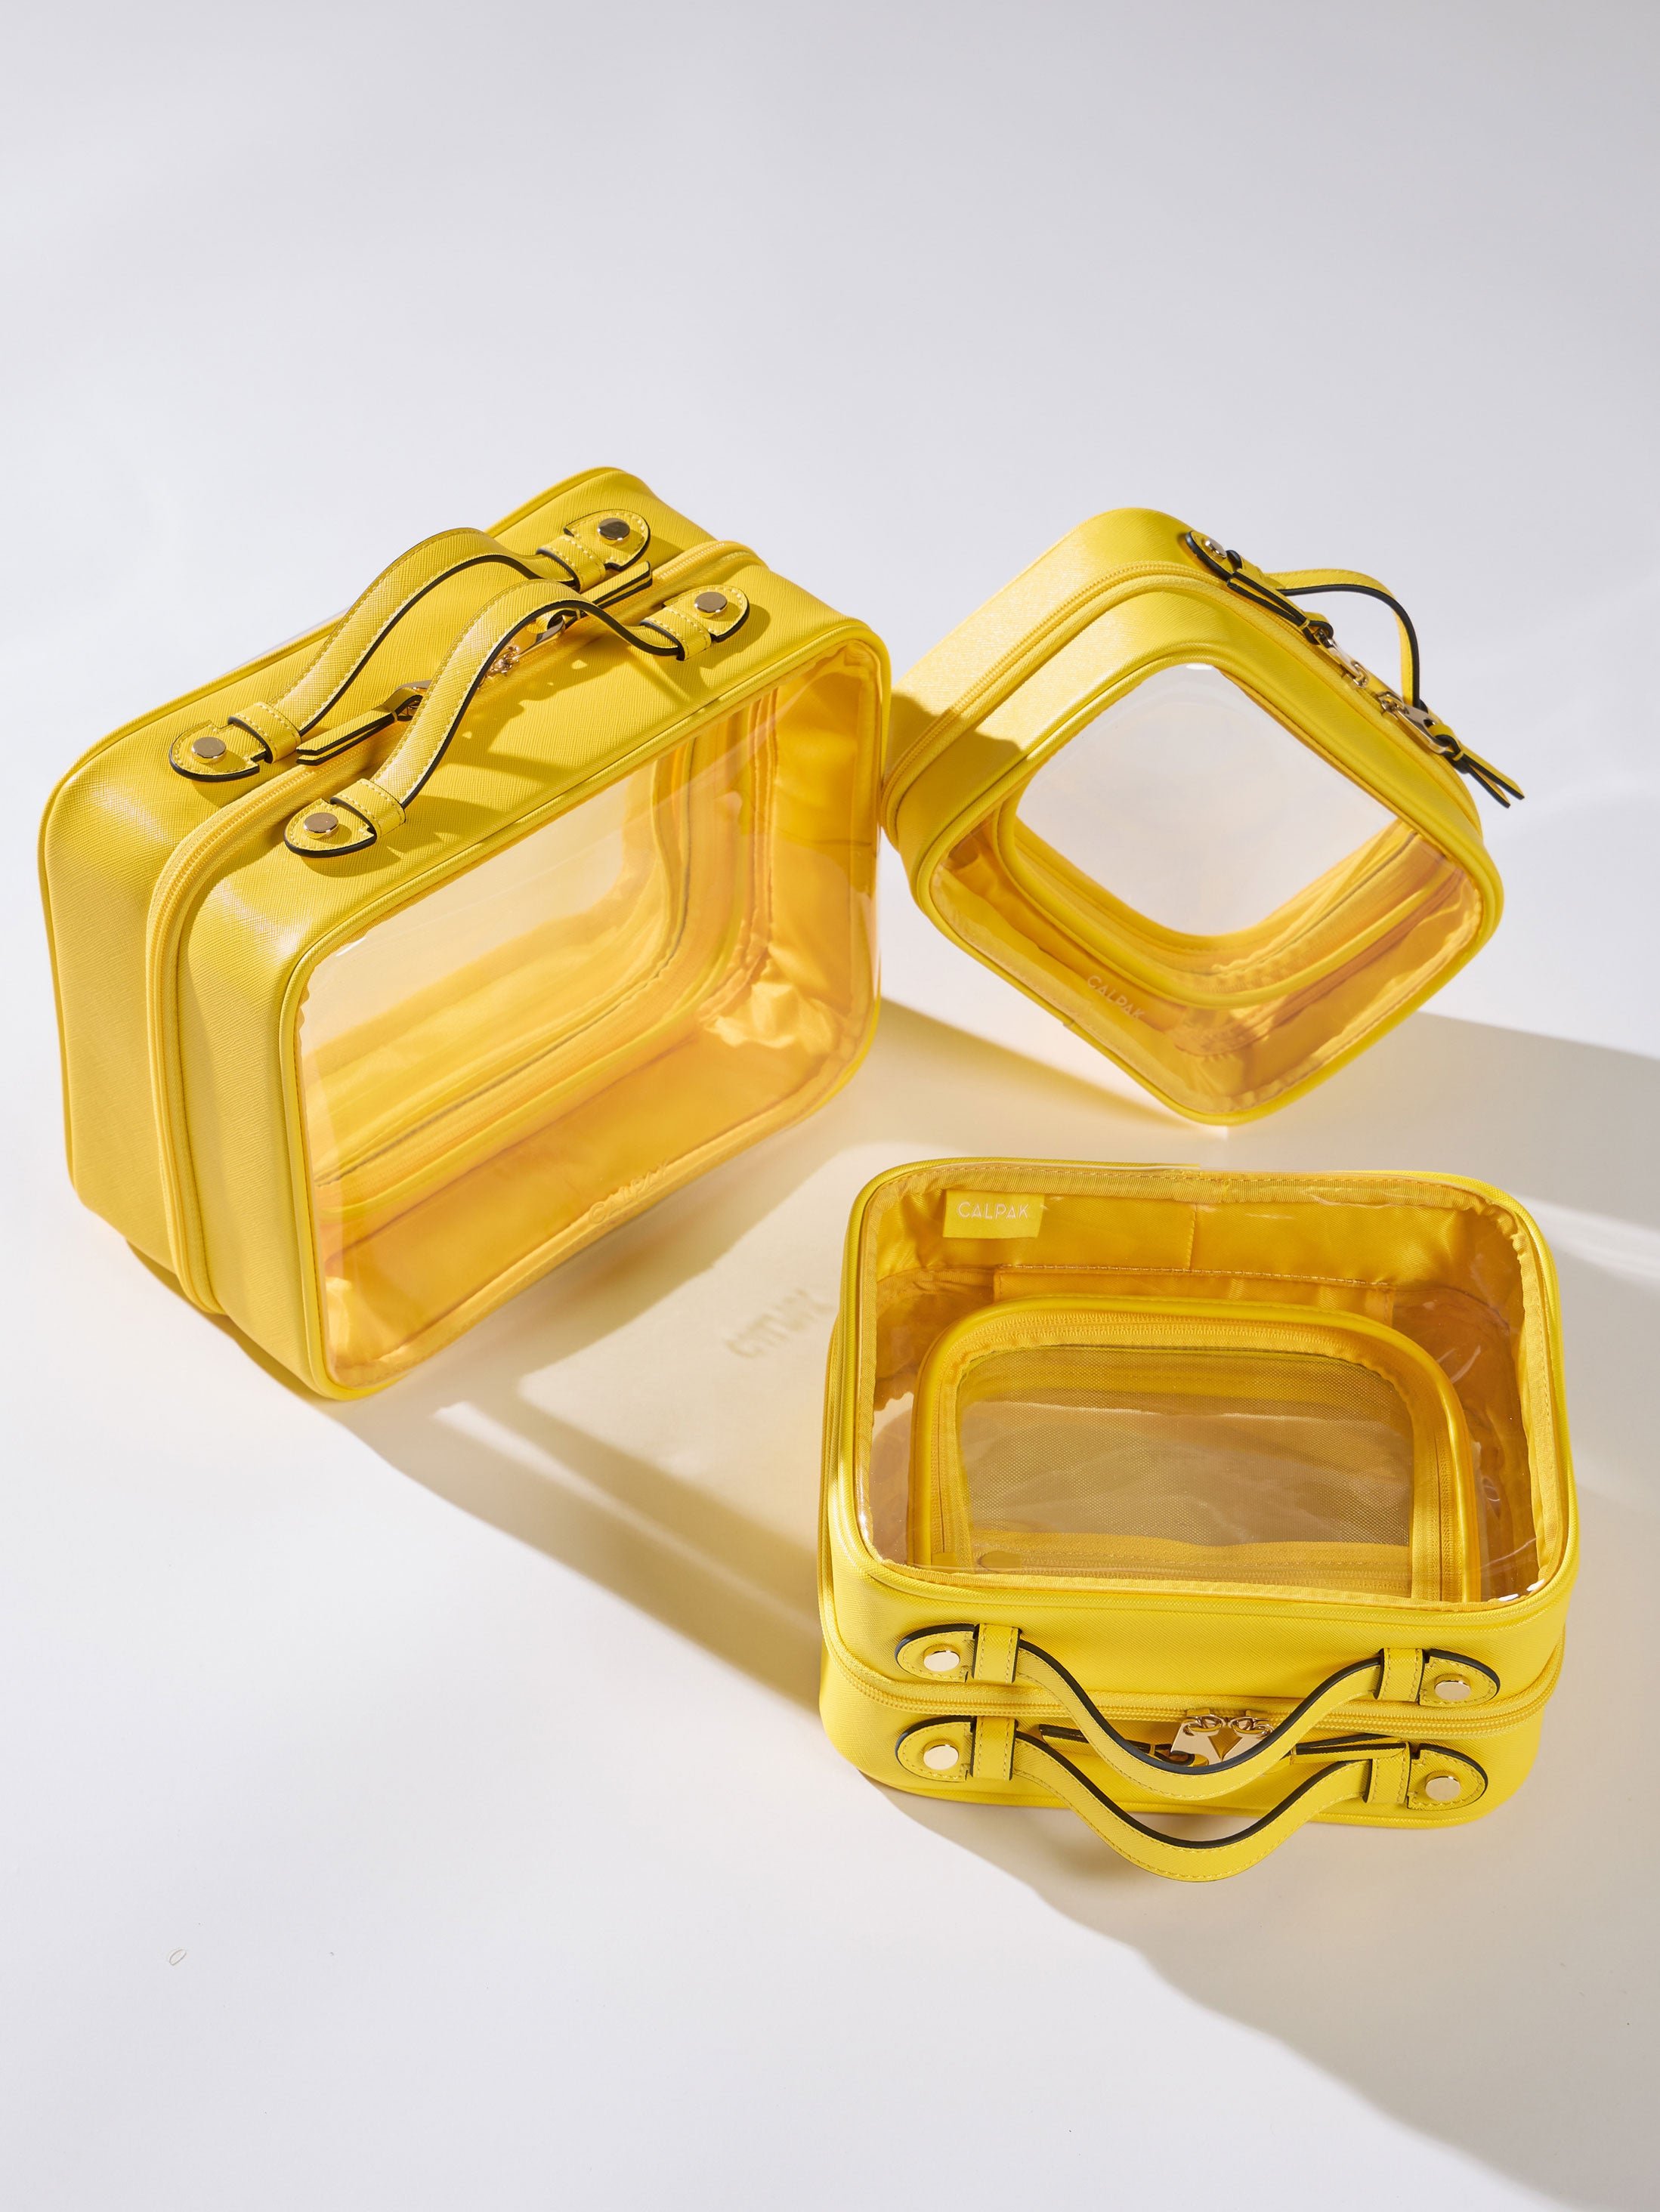 Yellow CALPAK Clear Cosmetic Cases in Medium, Large, and Small for organizing skin care items